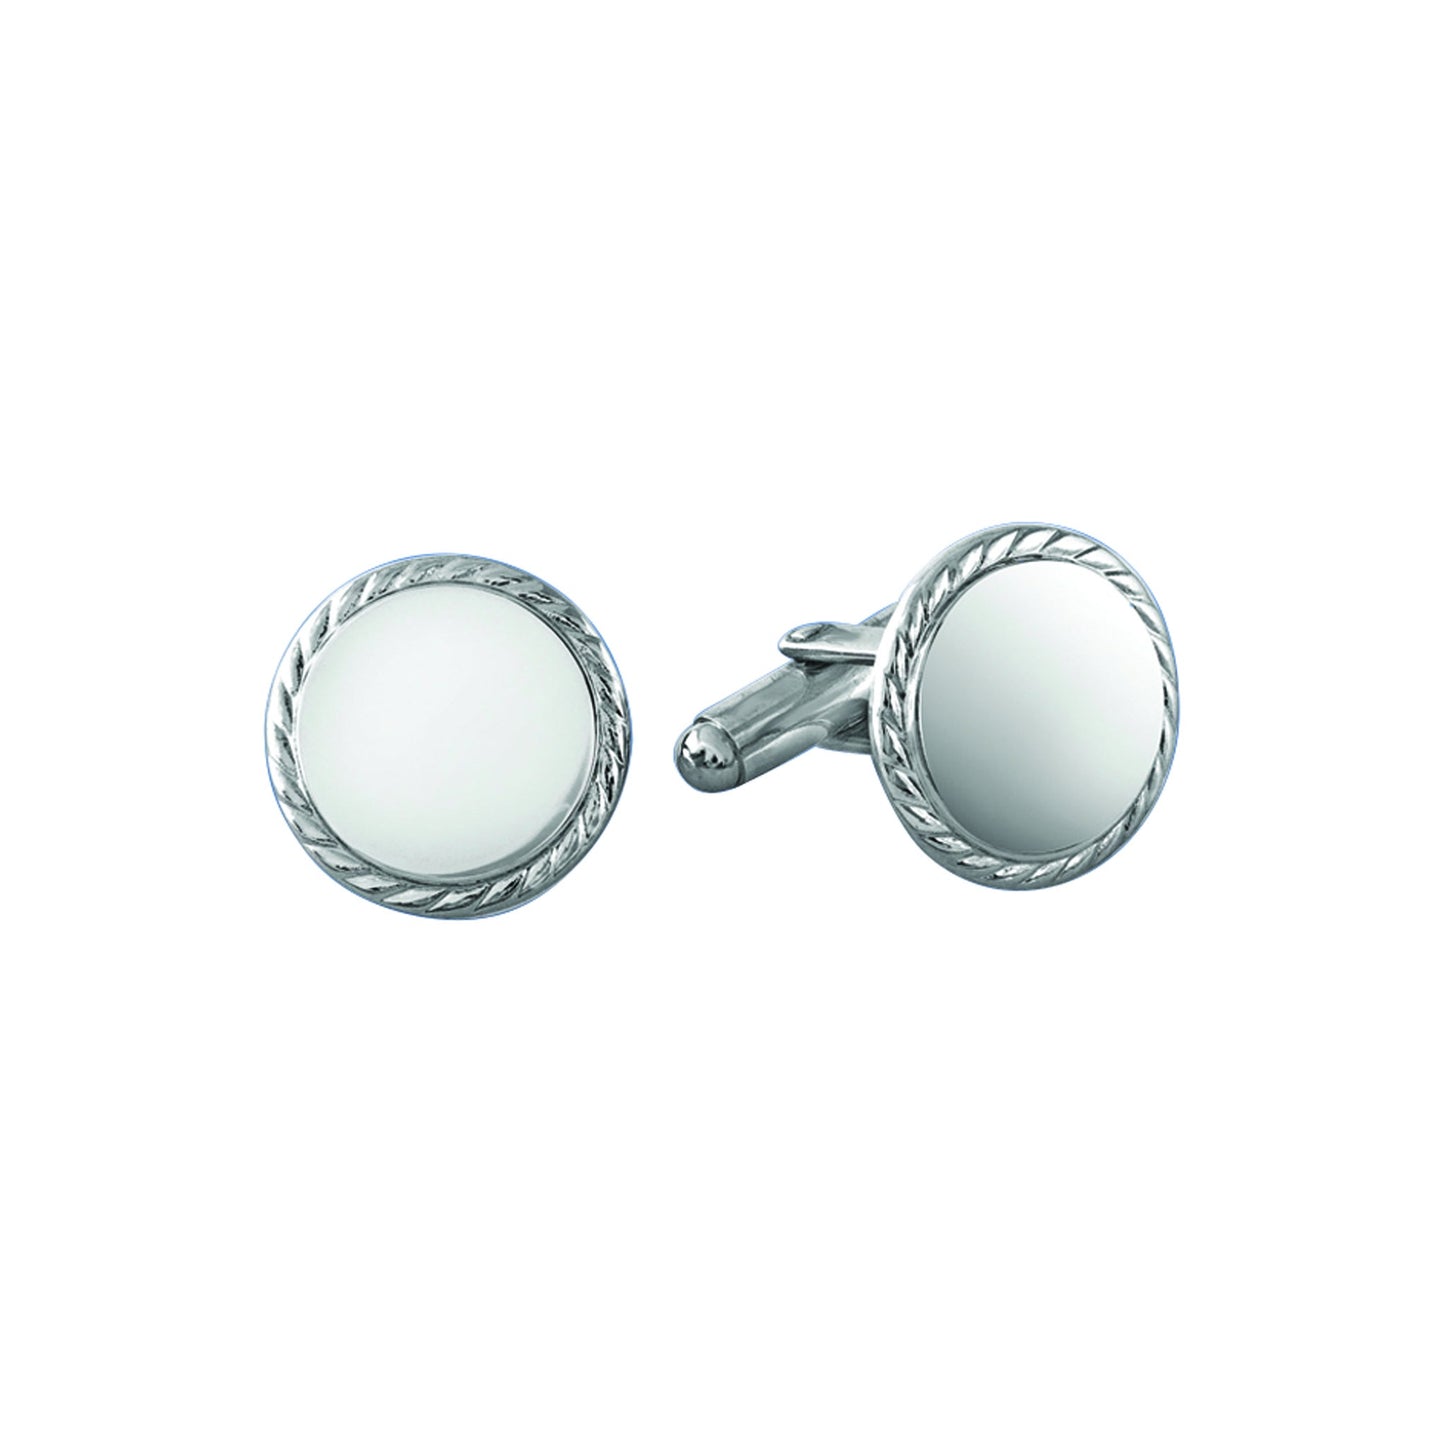 A sterling silver round rope edge polished cufflinks displayed on a neutral white background.